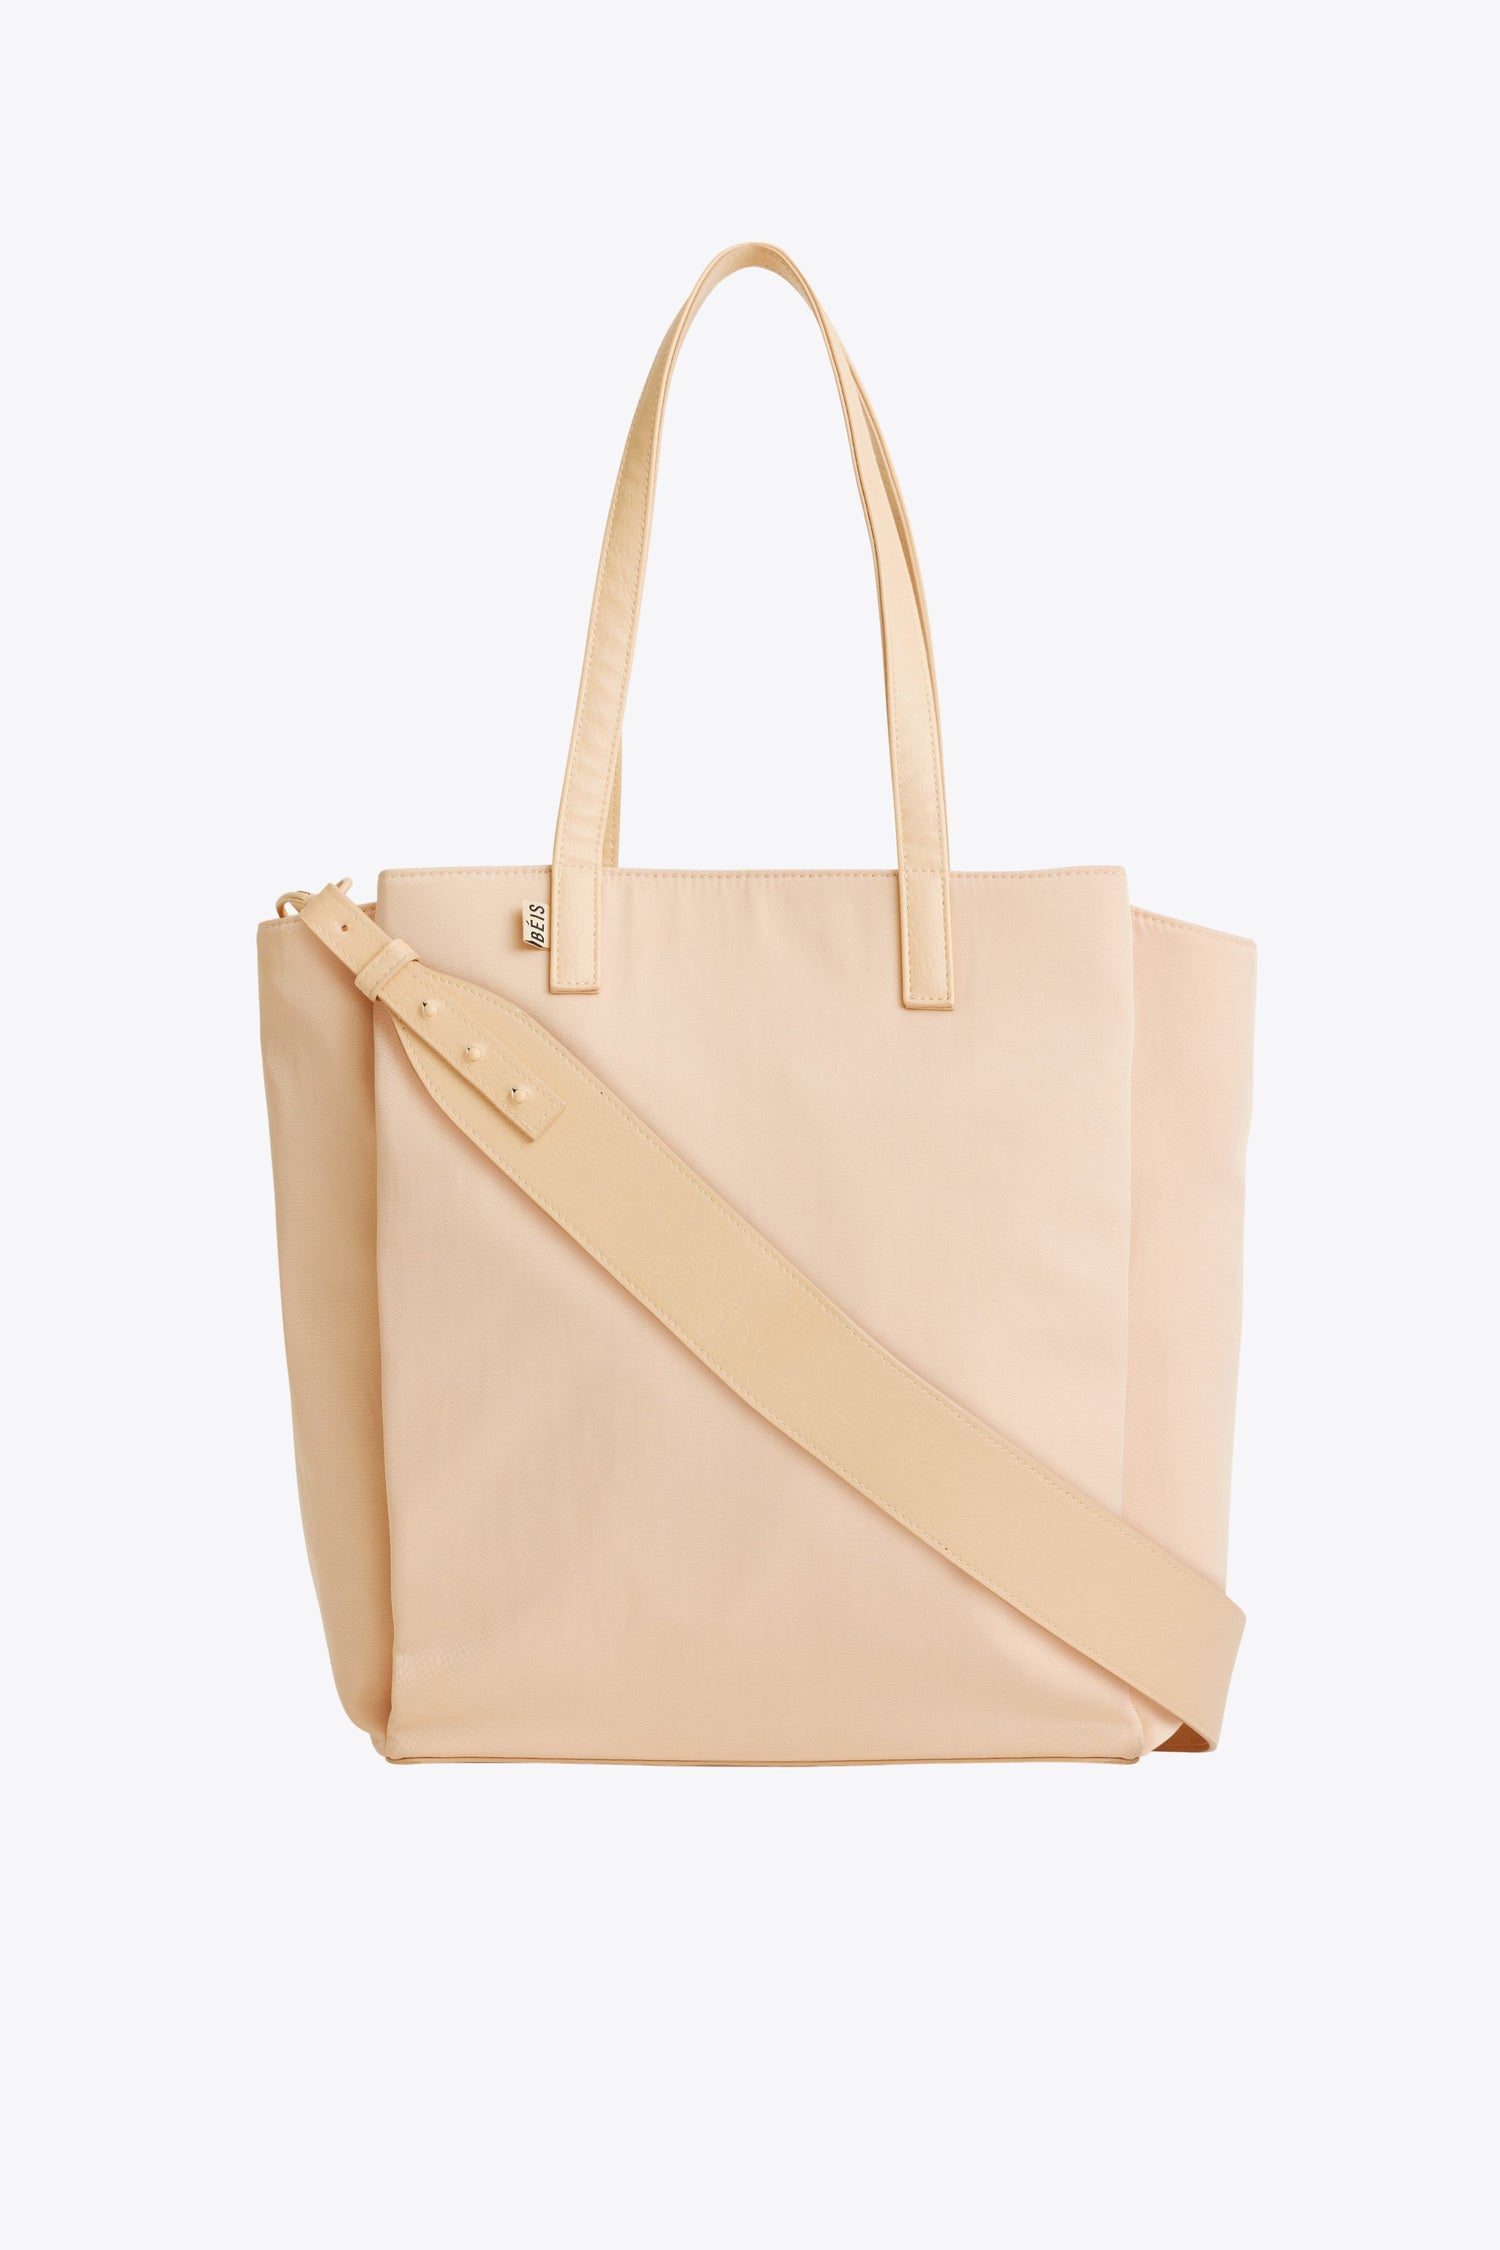 The Commuter Tote Colors